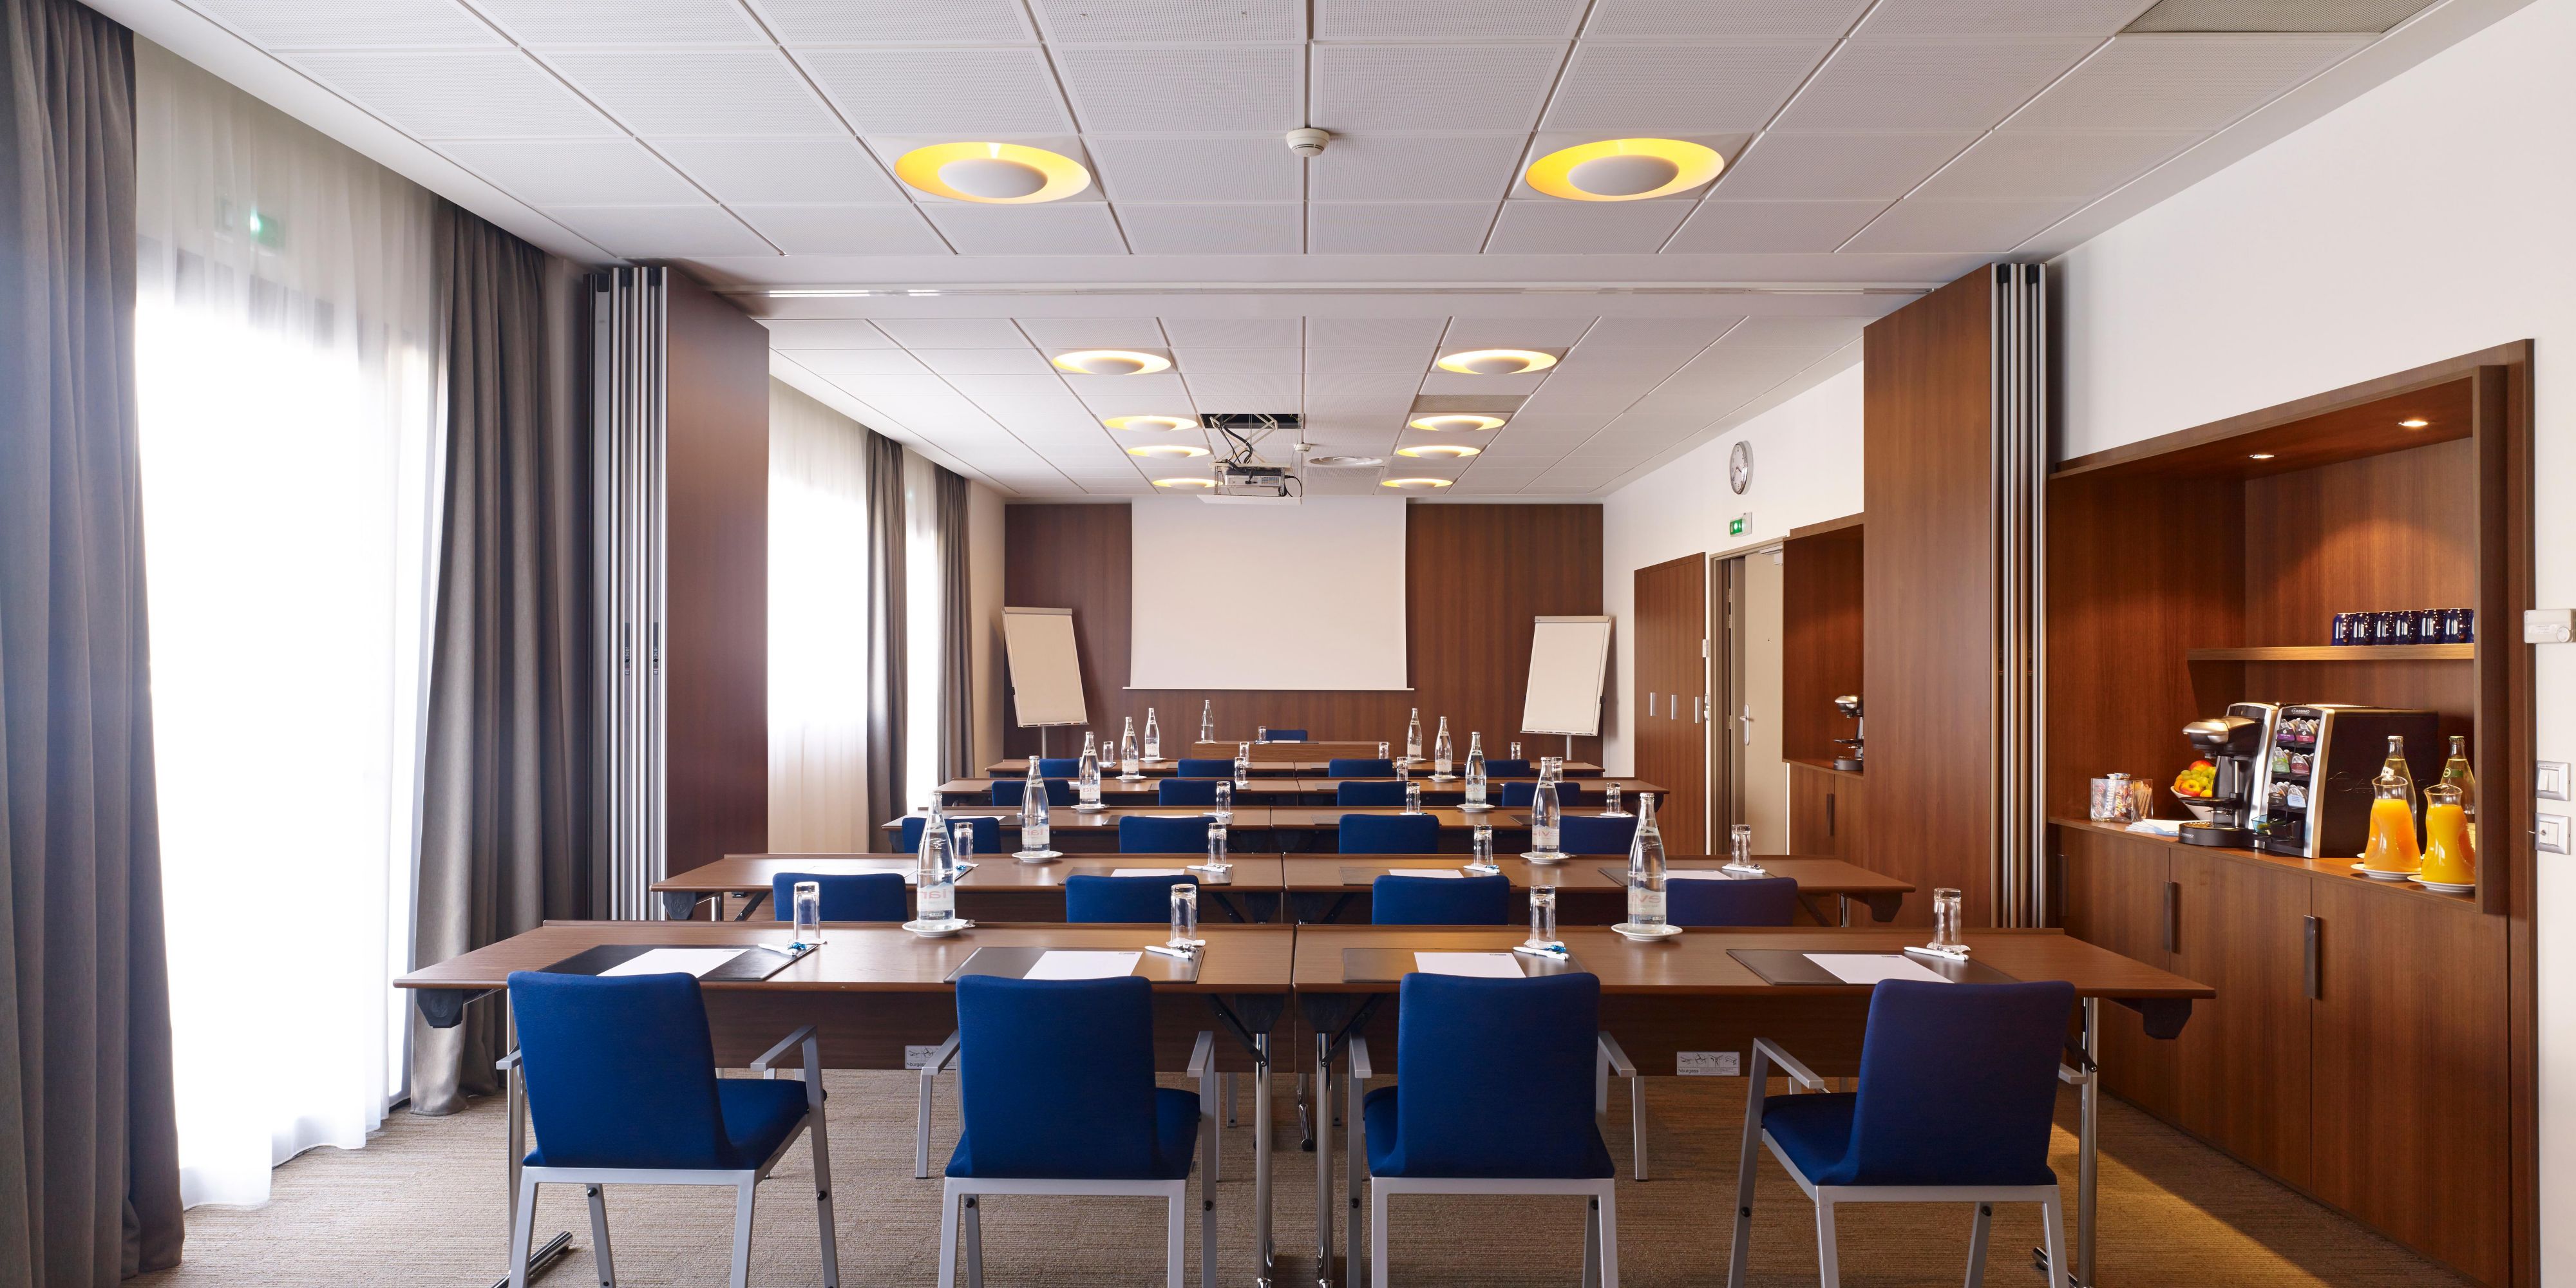 Let Holiday Inn Express Toulouse Airport staff arrange your business meetings in one of 3 naturally lit conference rooms for 15-65 delegates. The air-conditioned rooms offer complimentary wireless Internet, and we can provide refreshments through the day.